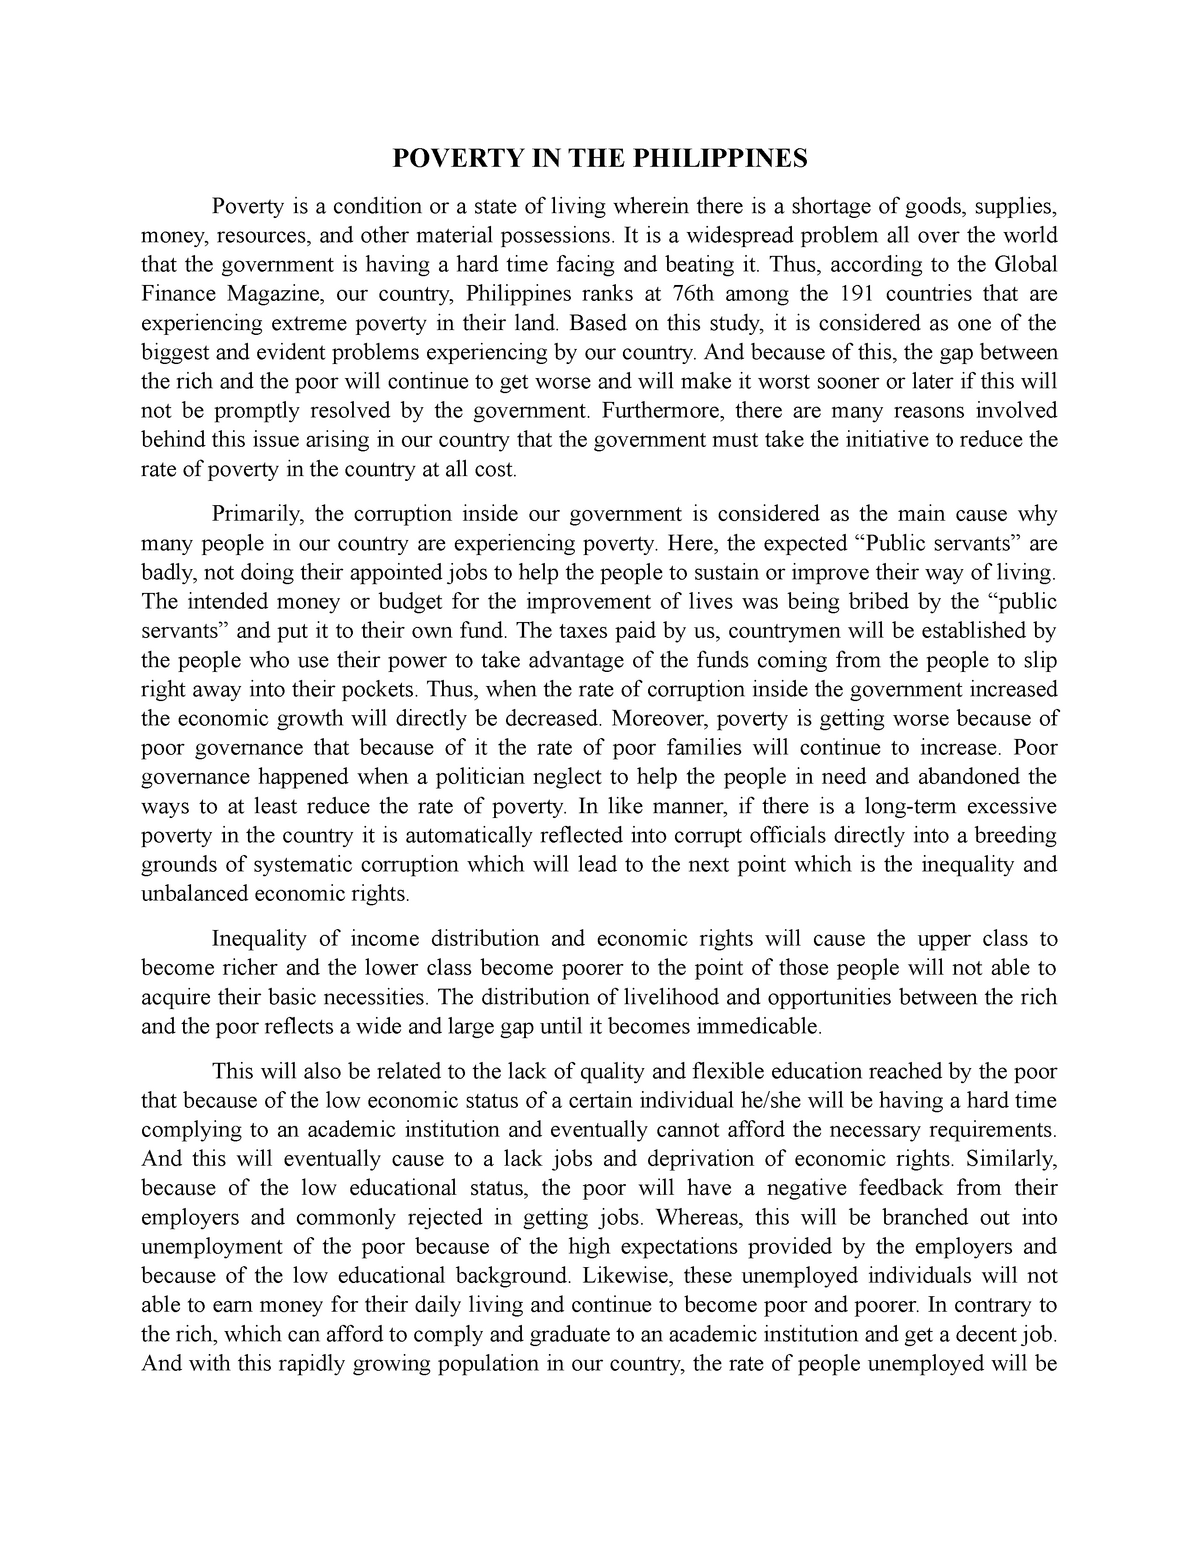 hypothesis on poverty in the philippines research paper